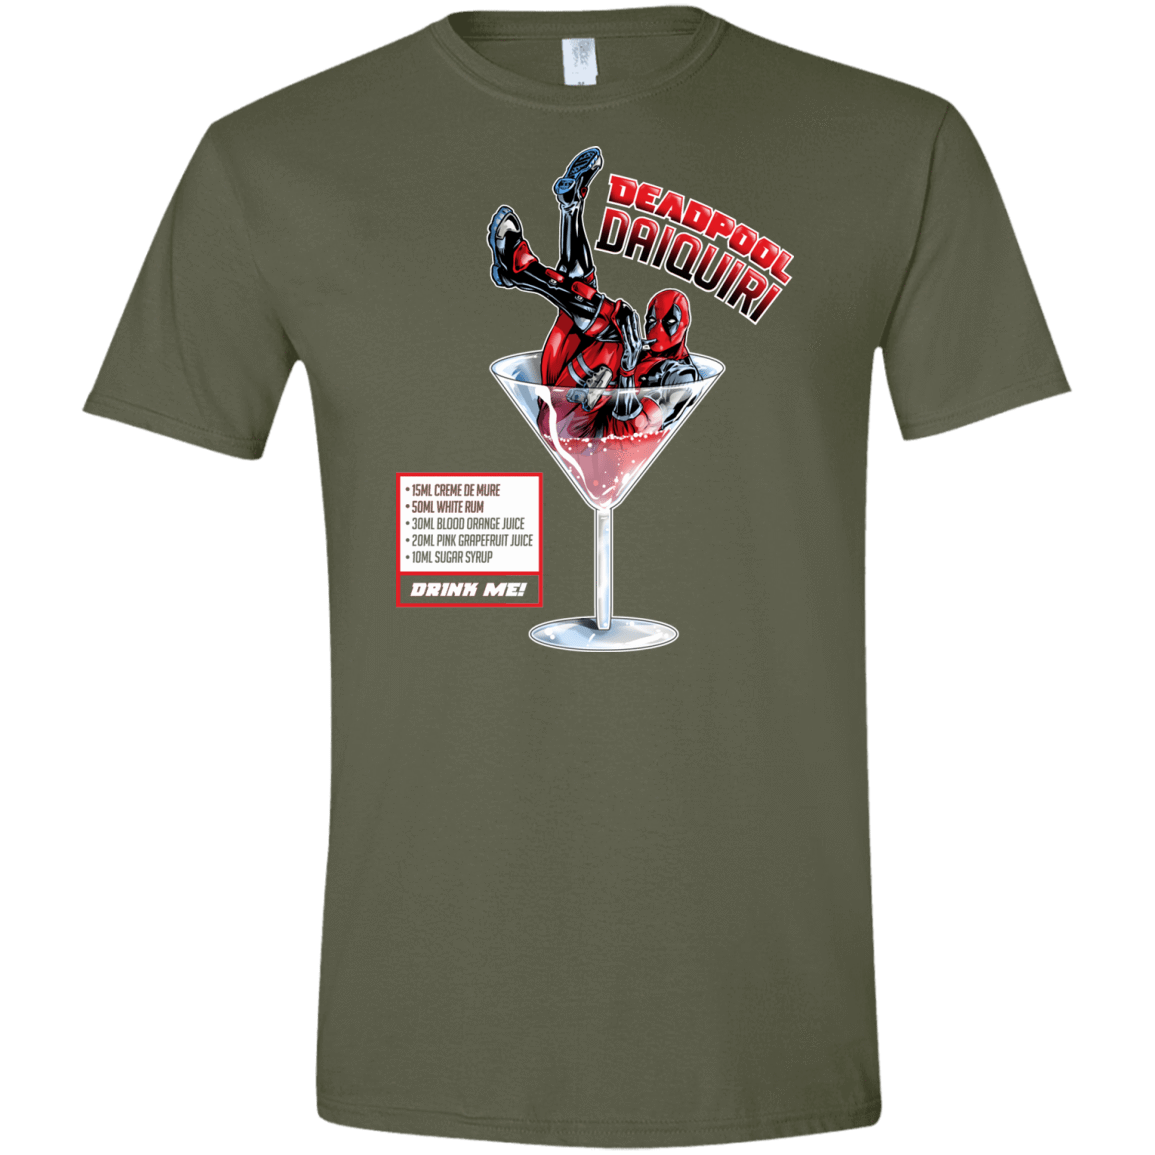 T-Shirts Military Green / S Deadpool Daiquiri Men's Semi-Fitted Softstyle